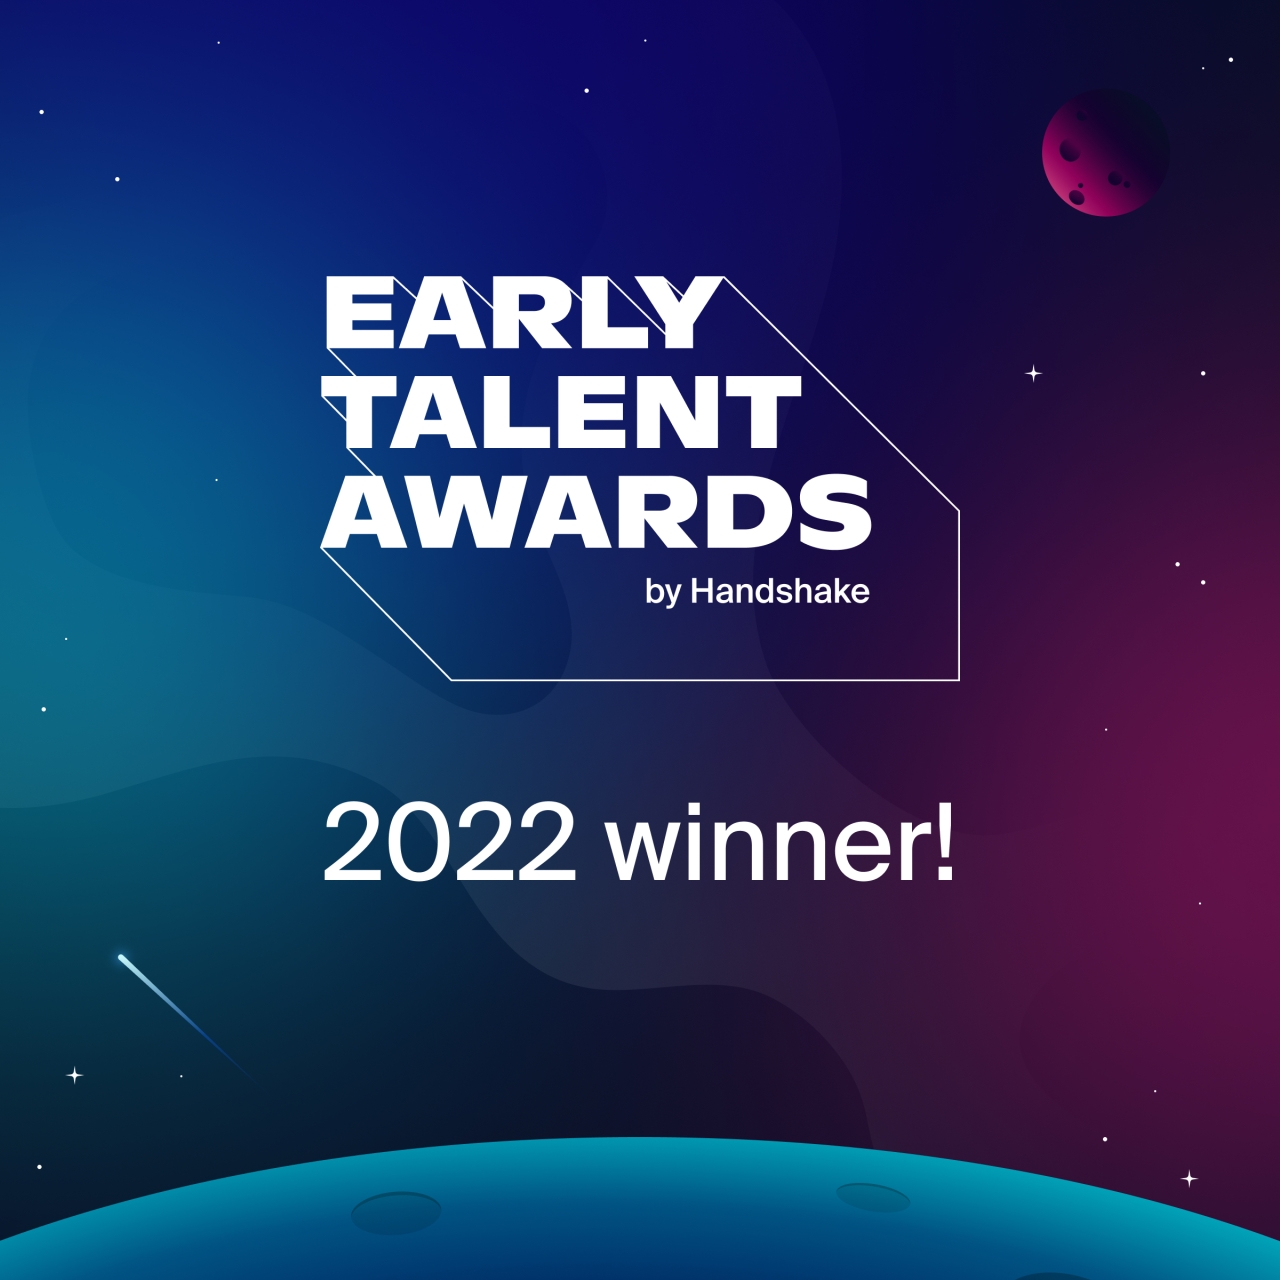 Early Talent Awards by Handshake 2022 Winner! Graphic